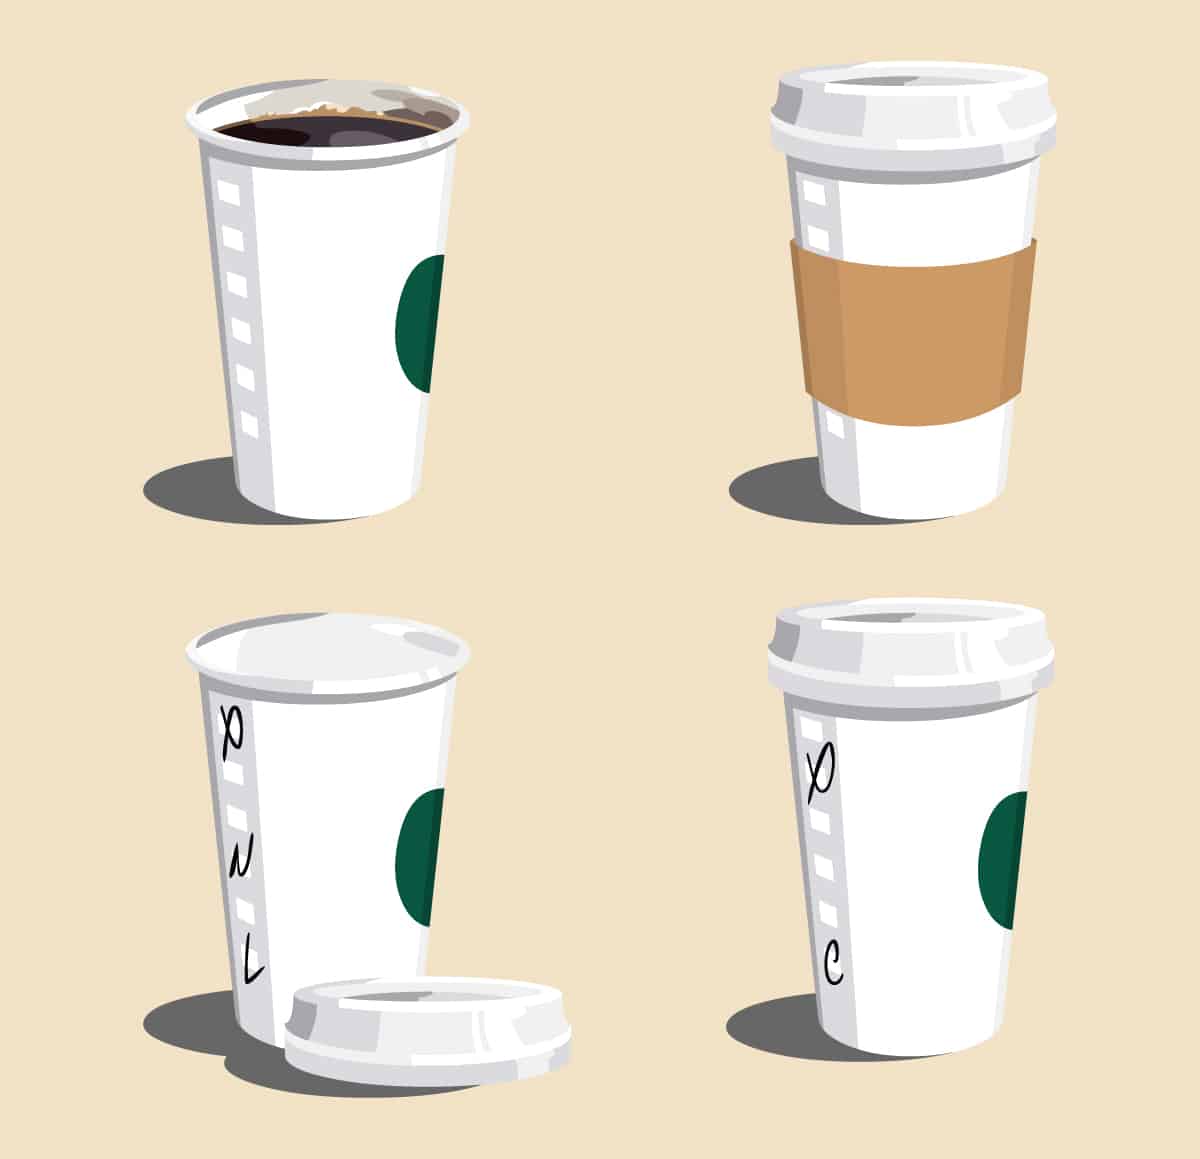 Why Are Starbucks Cup Sizes Different?